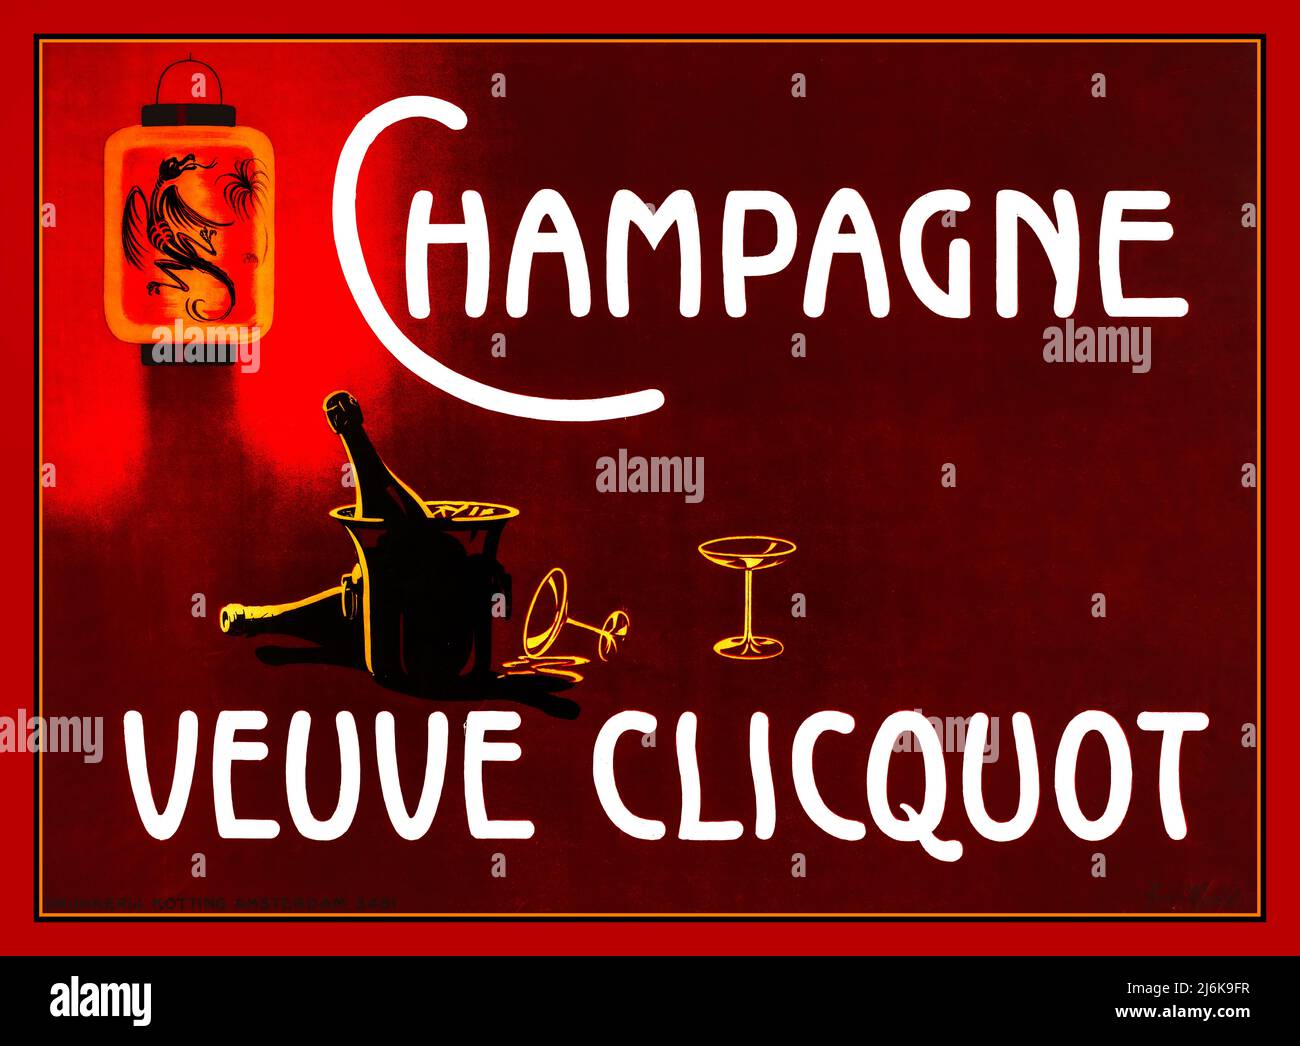 VEUVE CLICQUOT Vintage Champagne Poster Champagne Veuve Clicquot 1900s  Dutch Poster Advertisement by Arnold van Roessel Stock Photo - Alamy